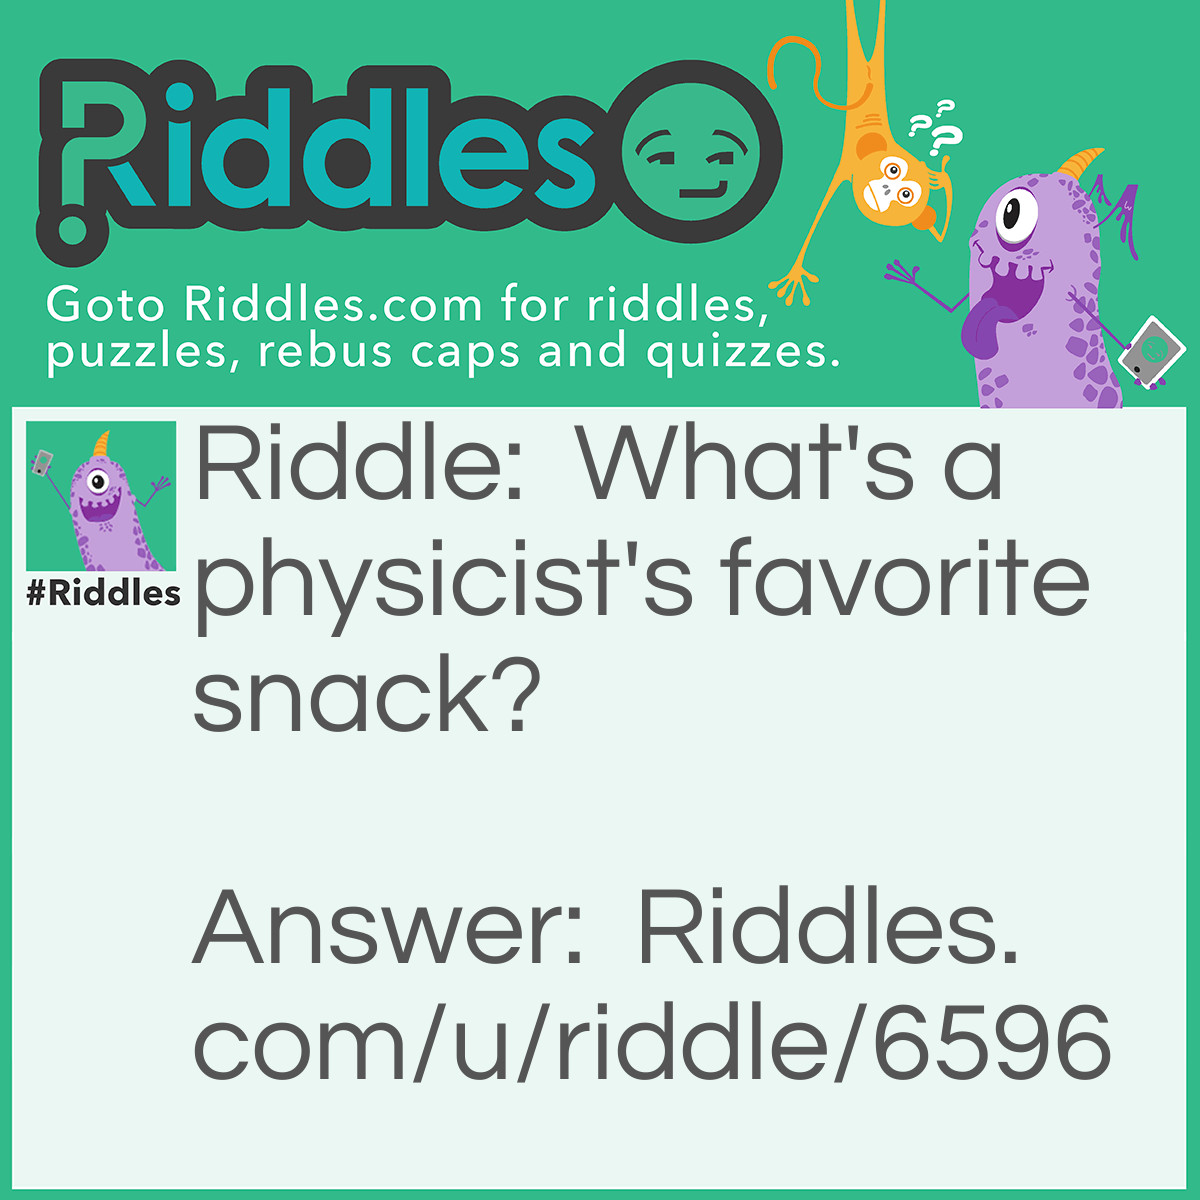 Riddle: What's a physicist's favorite snack? Answer: A "GRAM"-cracker.